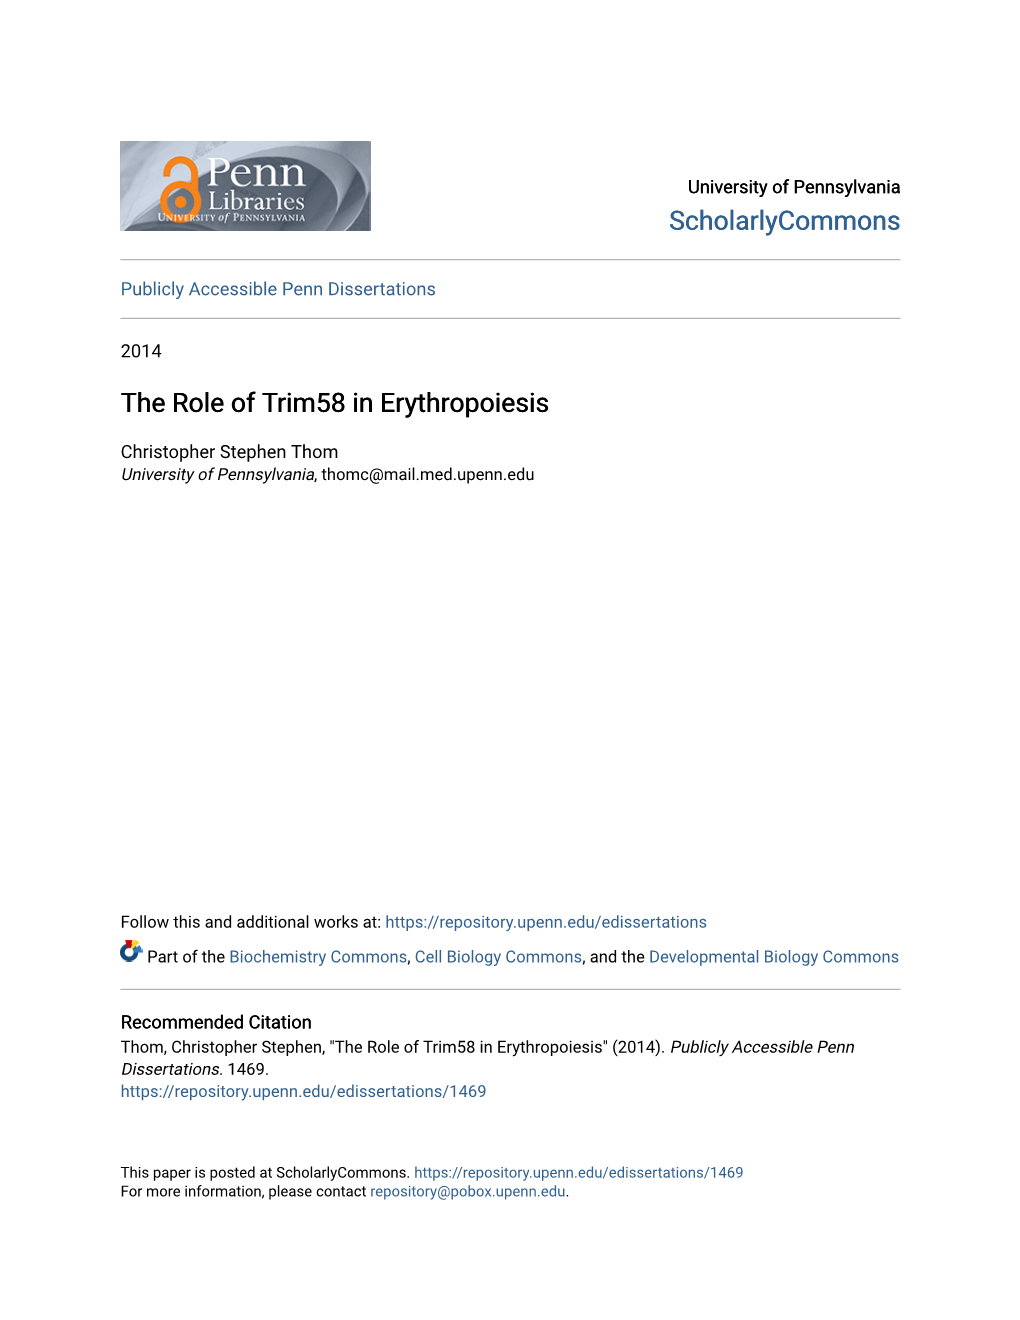 The Role of Trim58 in Erythropoiesis